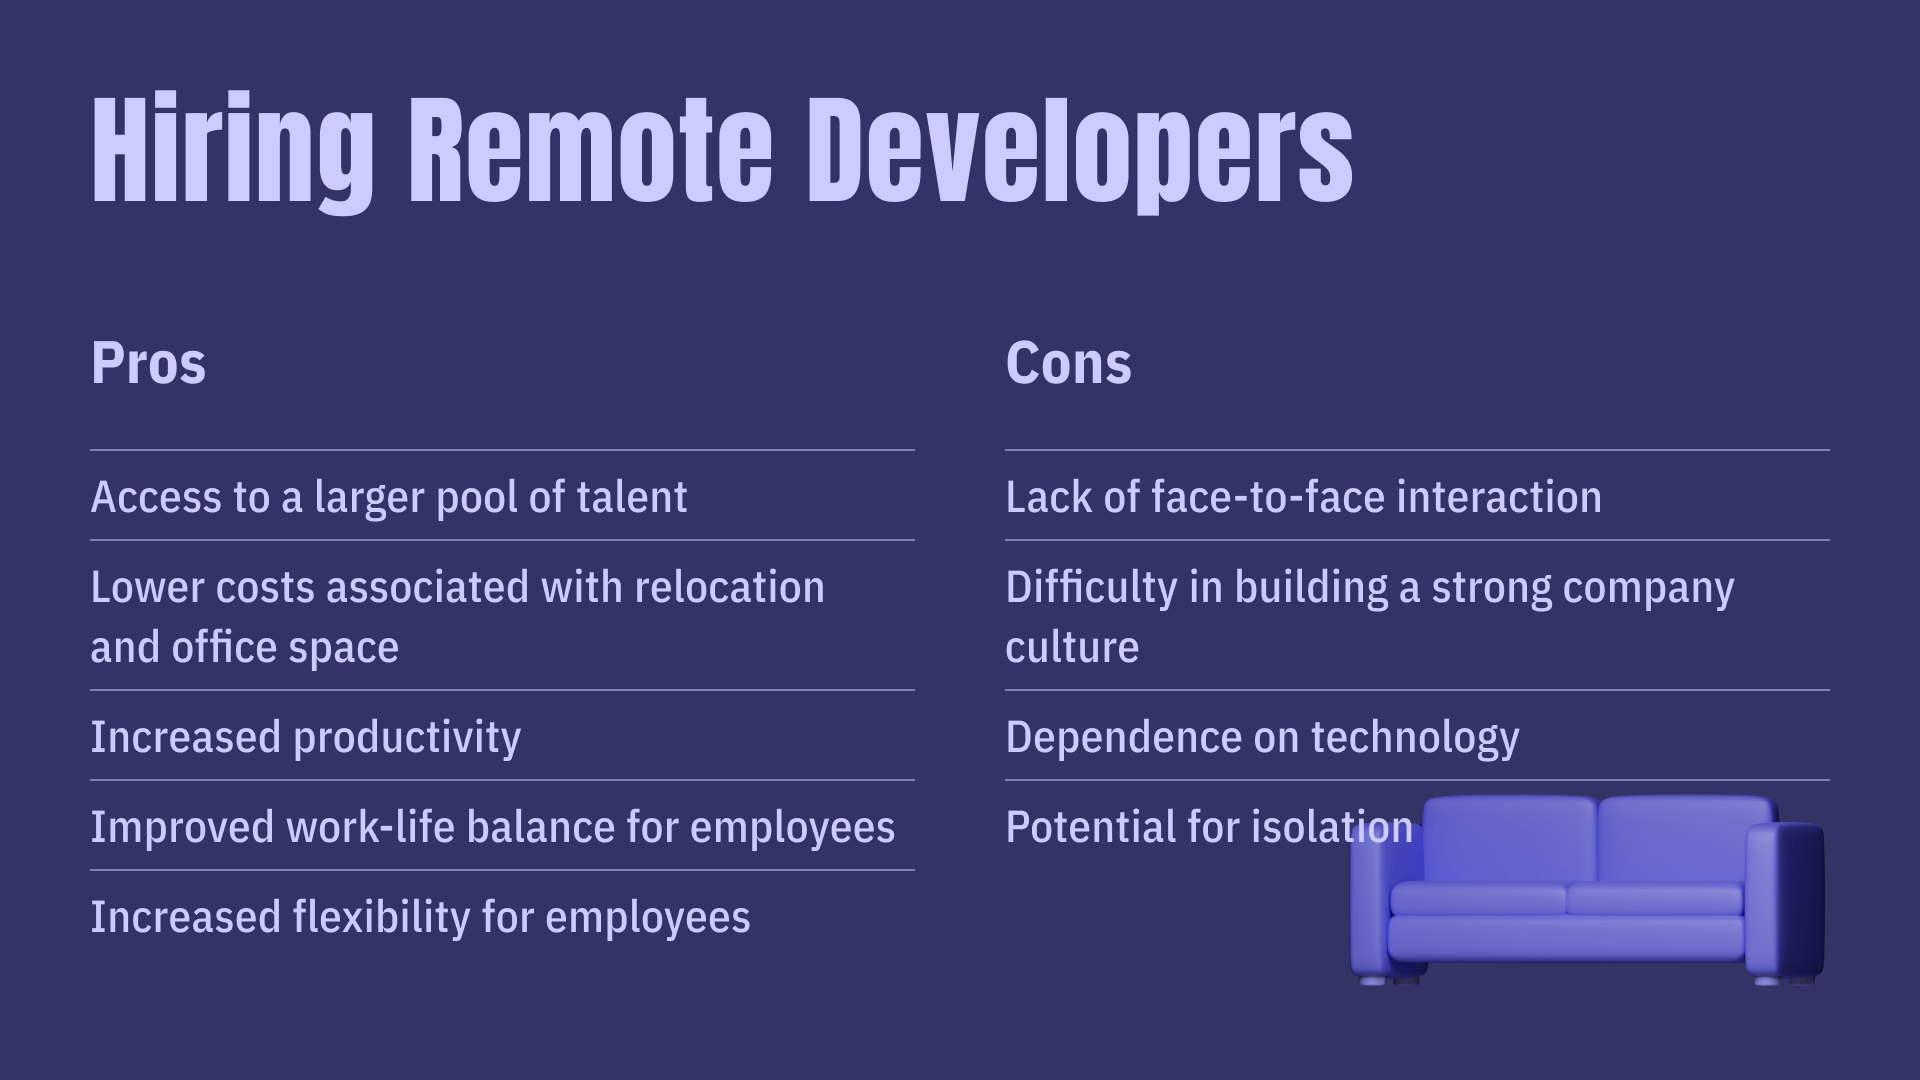 pros and cons of hiring remote developers